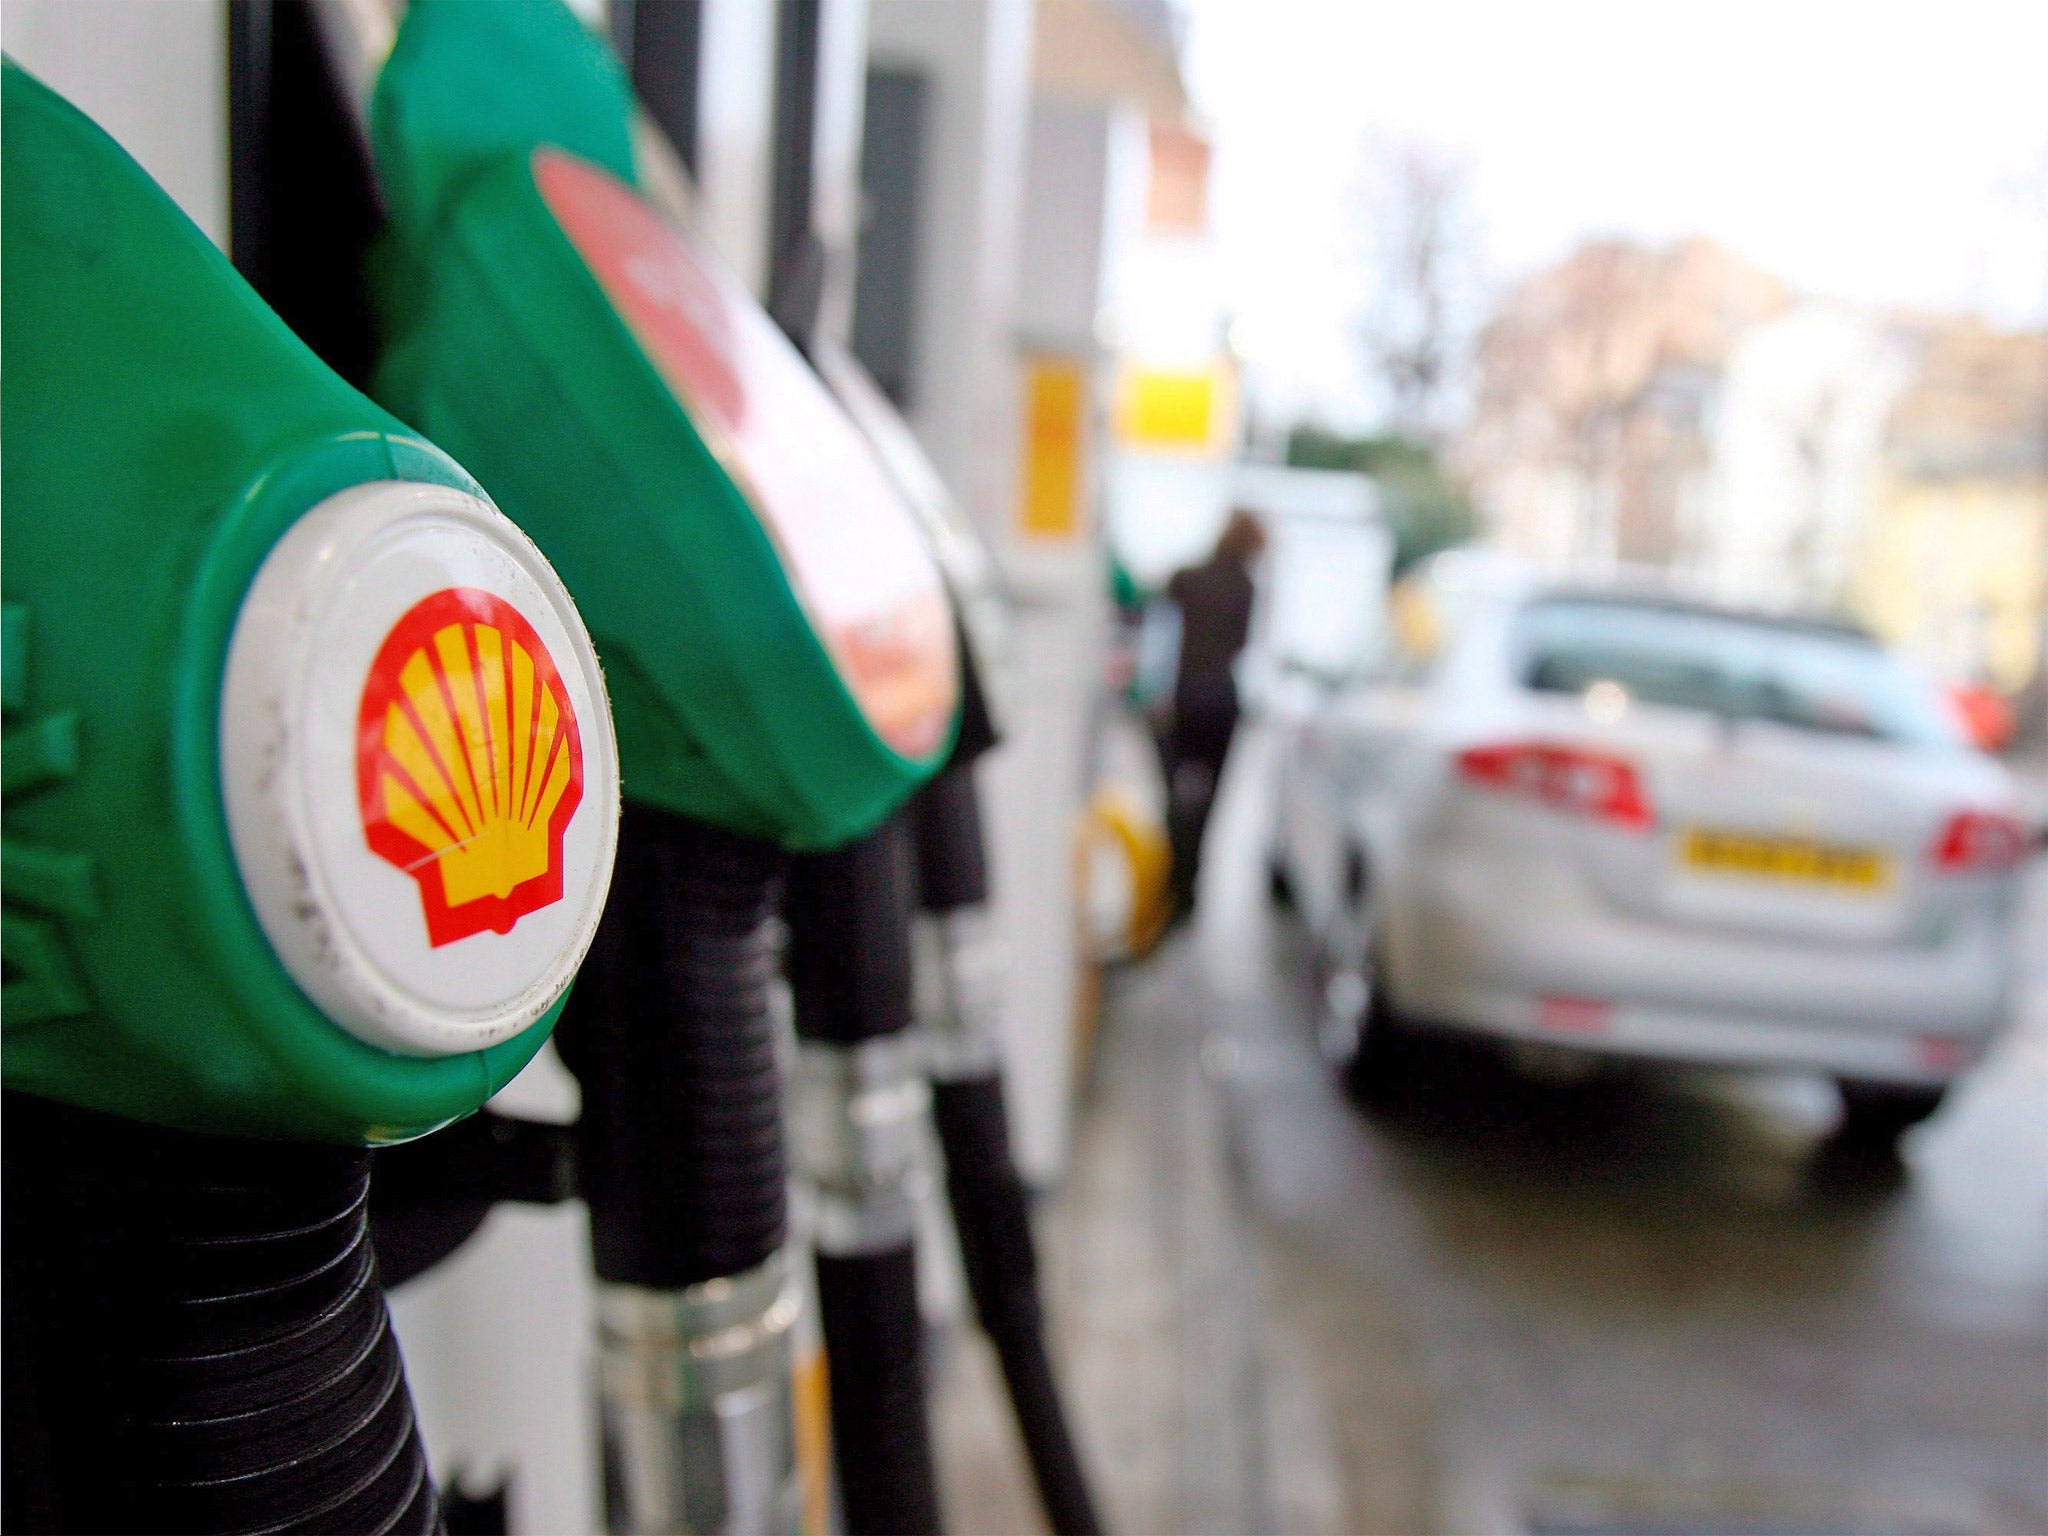 Petrol prices have dropped